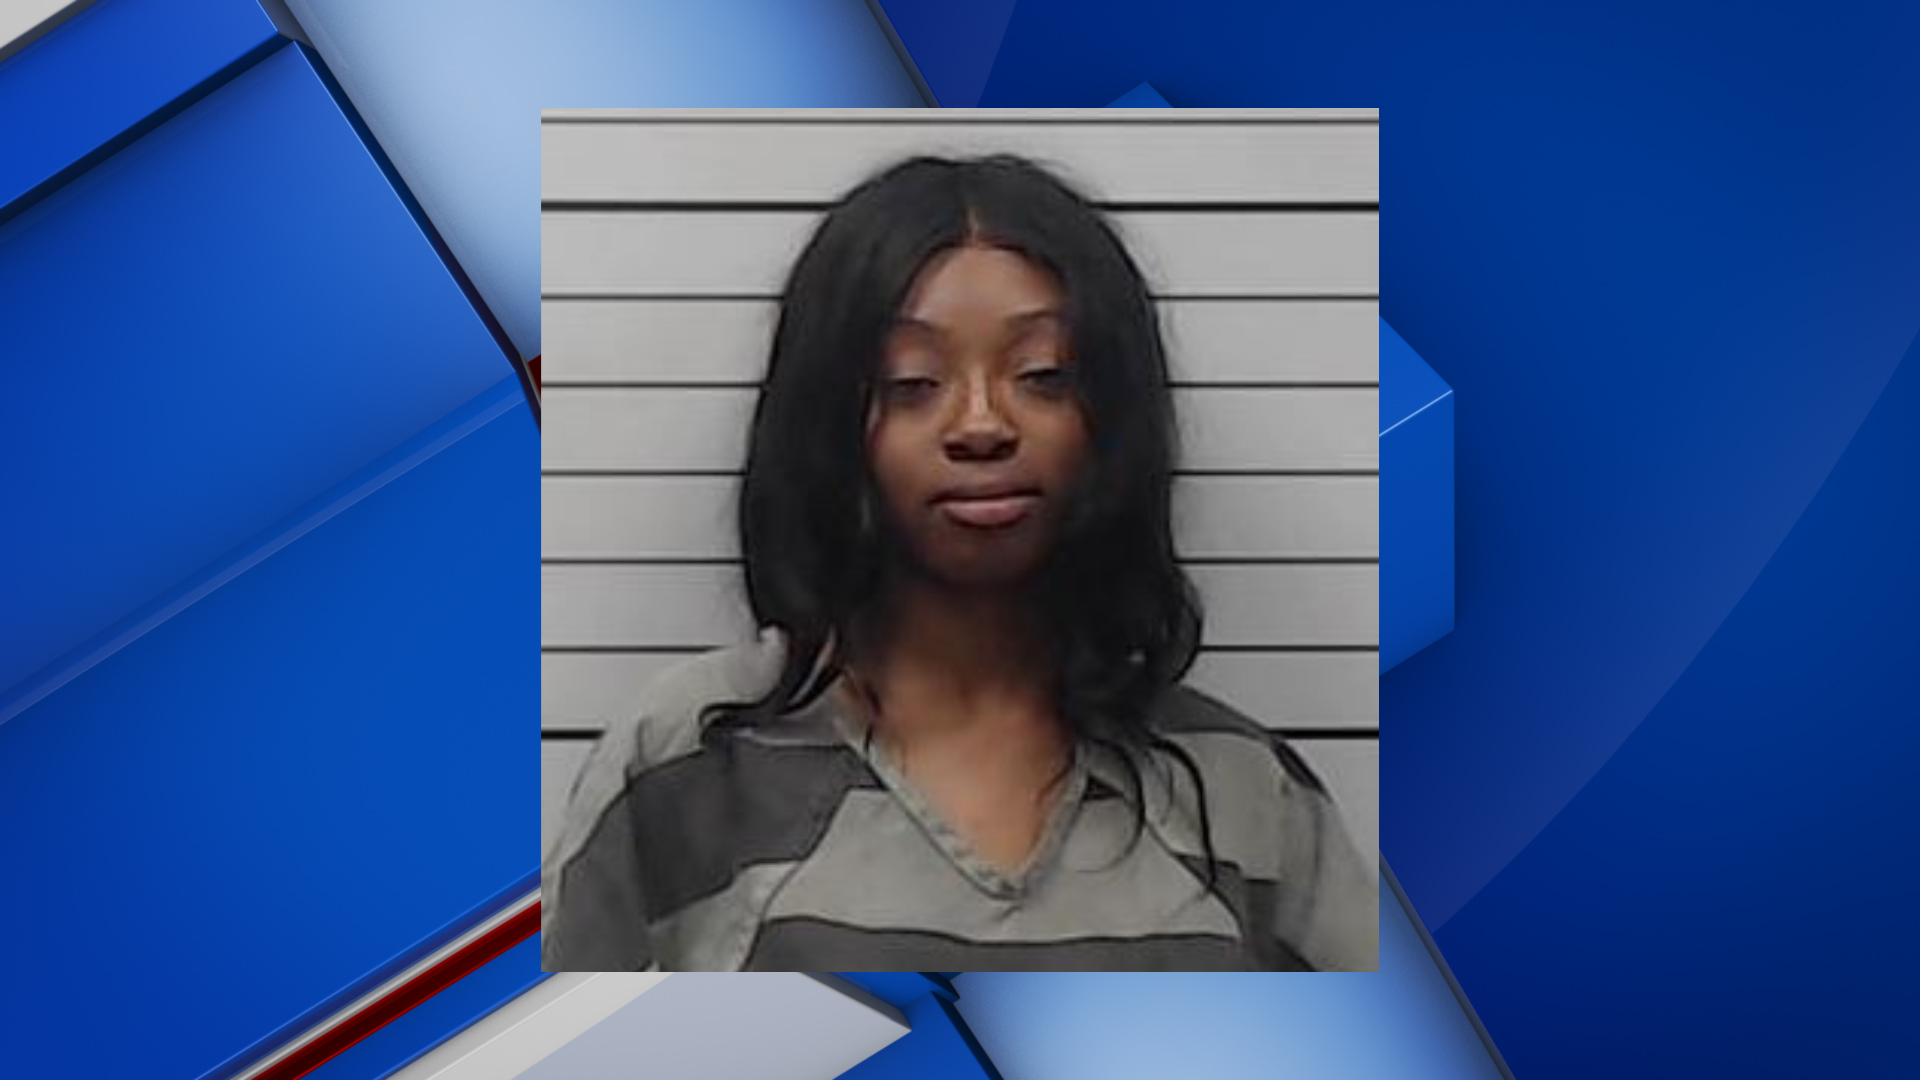 Lee County woman in jail, charged with second degree murder